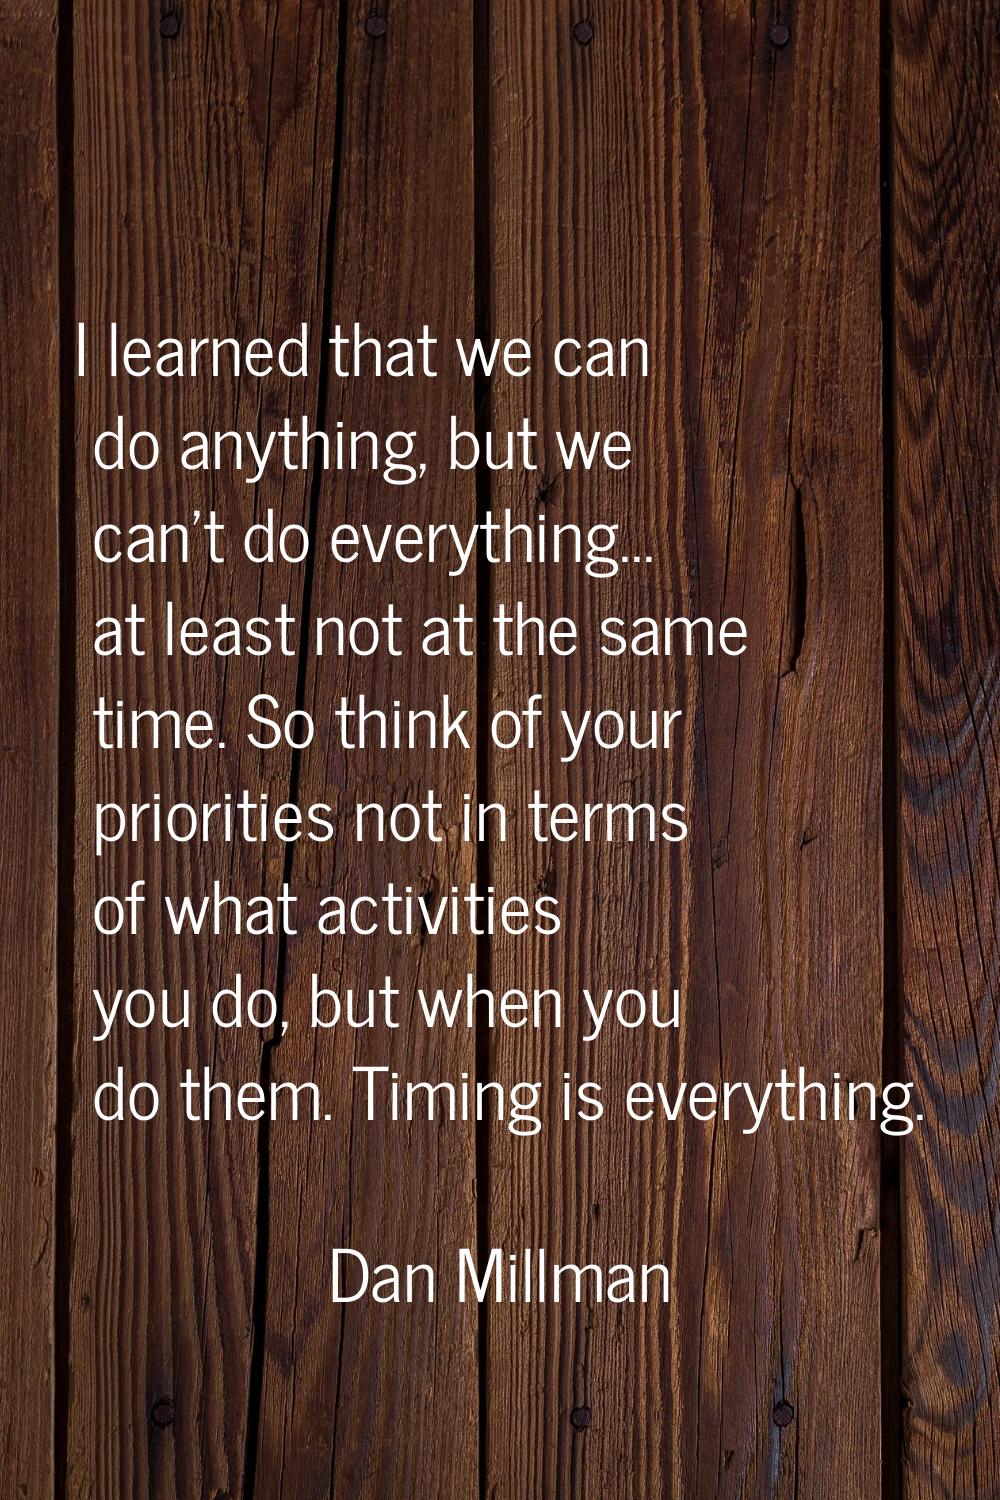 I learned that we can do anything, but we can't do everything... at least not at the same time. So 